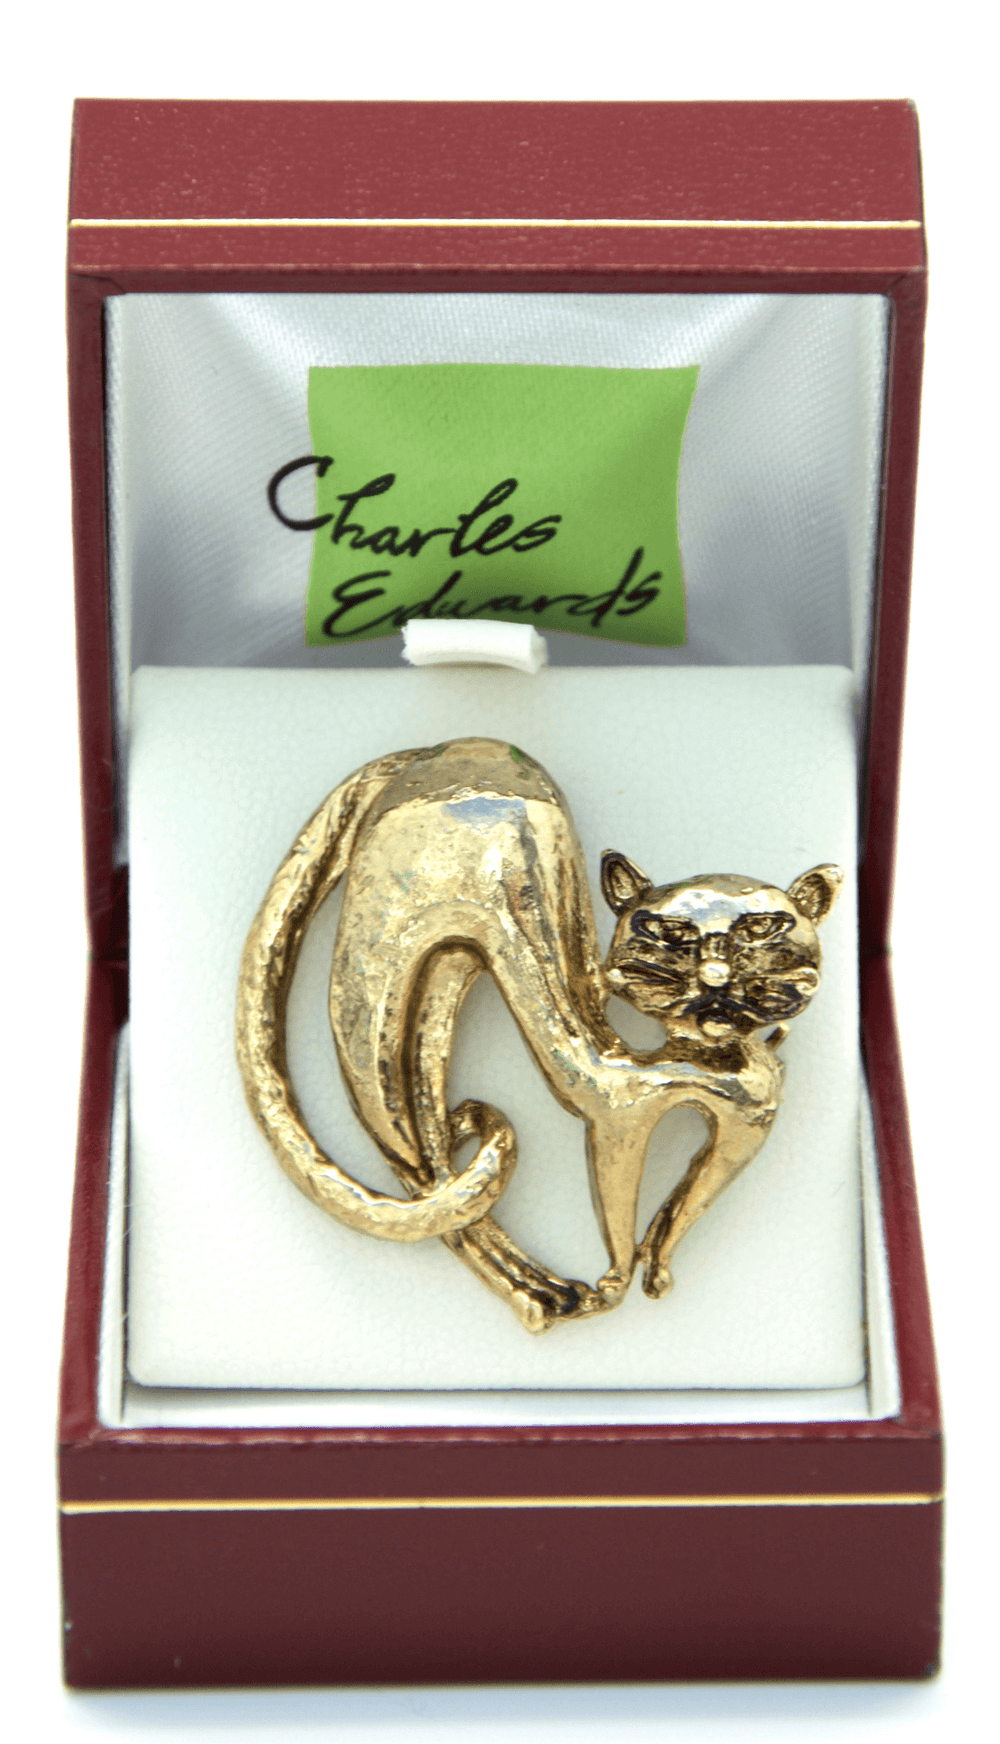 Set of 3 Cat Gold Crystal Brooches / Scarf Pins - Leopard, Trio of Cats, Cat Hunching - Gift Set